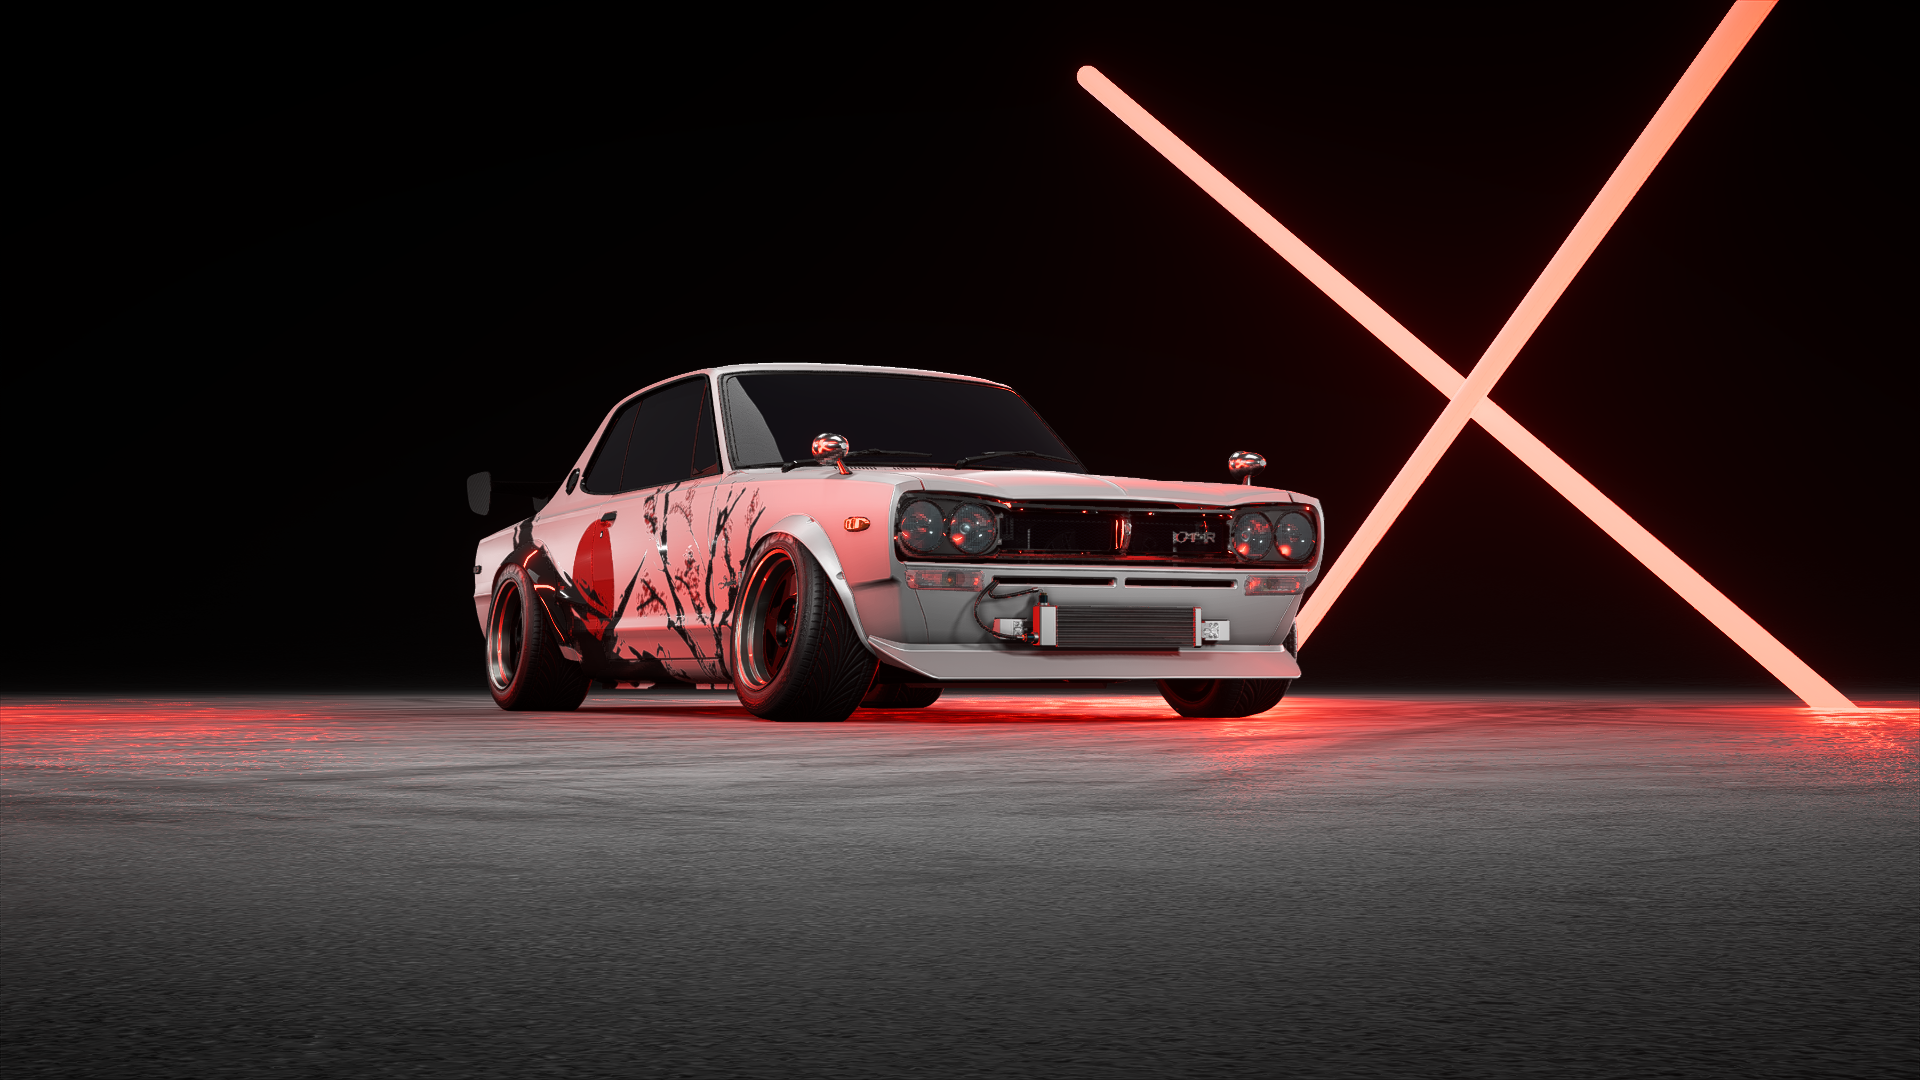 General 1920x1080 red white Need for Speed car vehicle Nissan Nissan Skyline Nissan Skyline C10 Japanese cars video games Electronic Arts